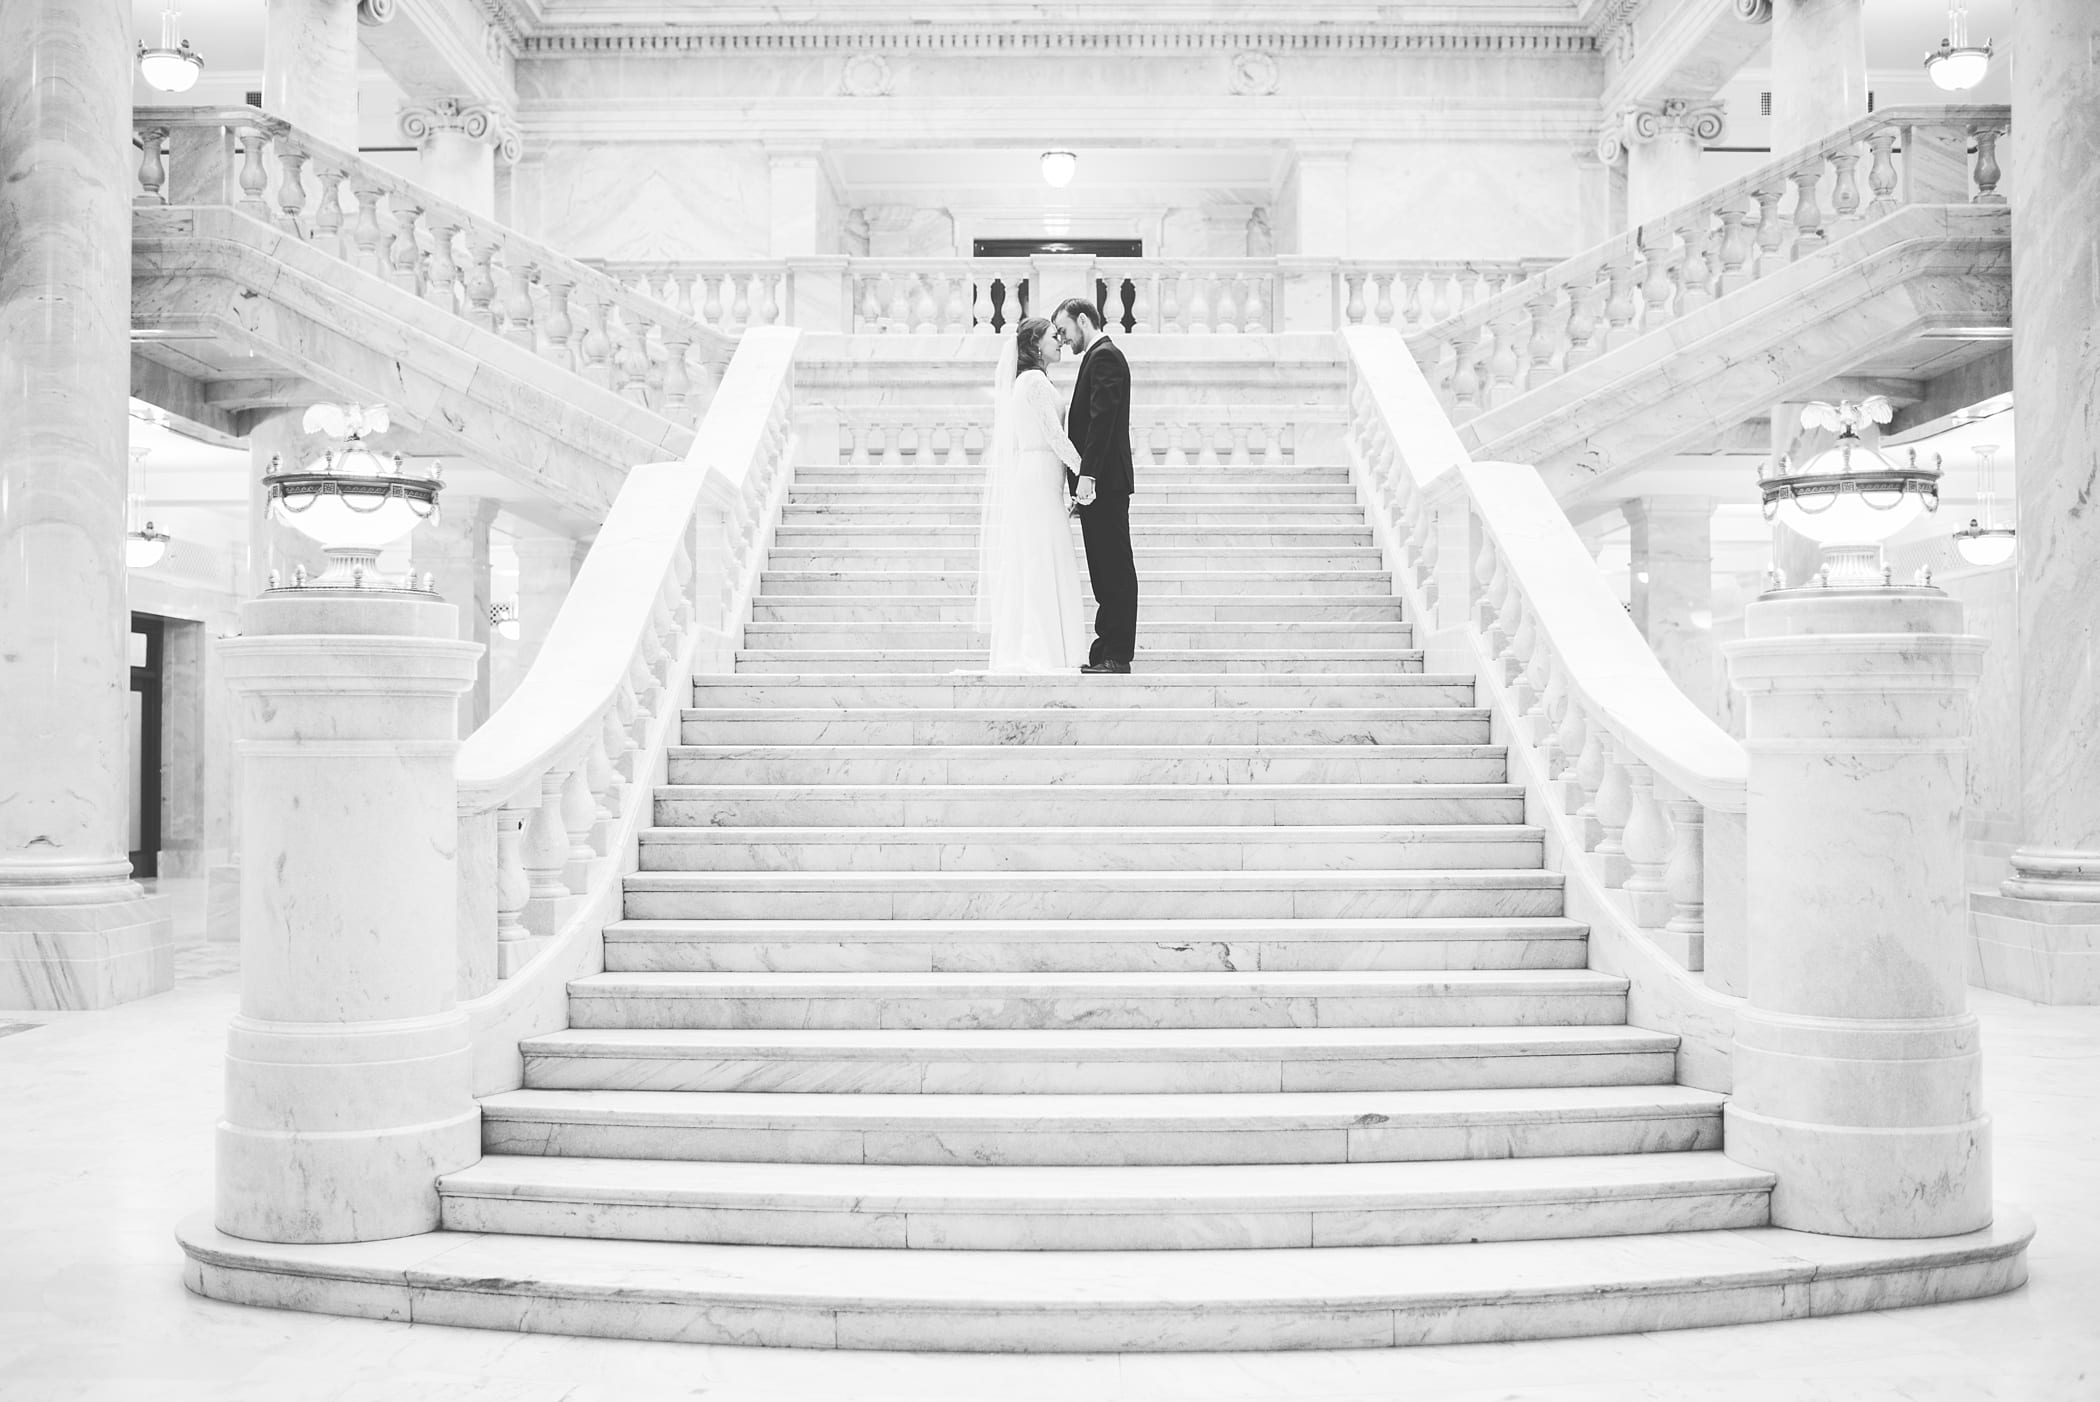 Formal Session at the Salt Lake City capitol building by Michelle & Logan